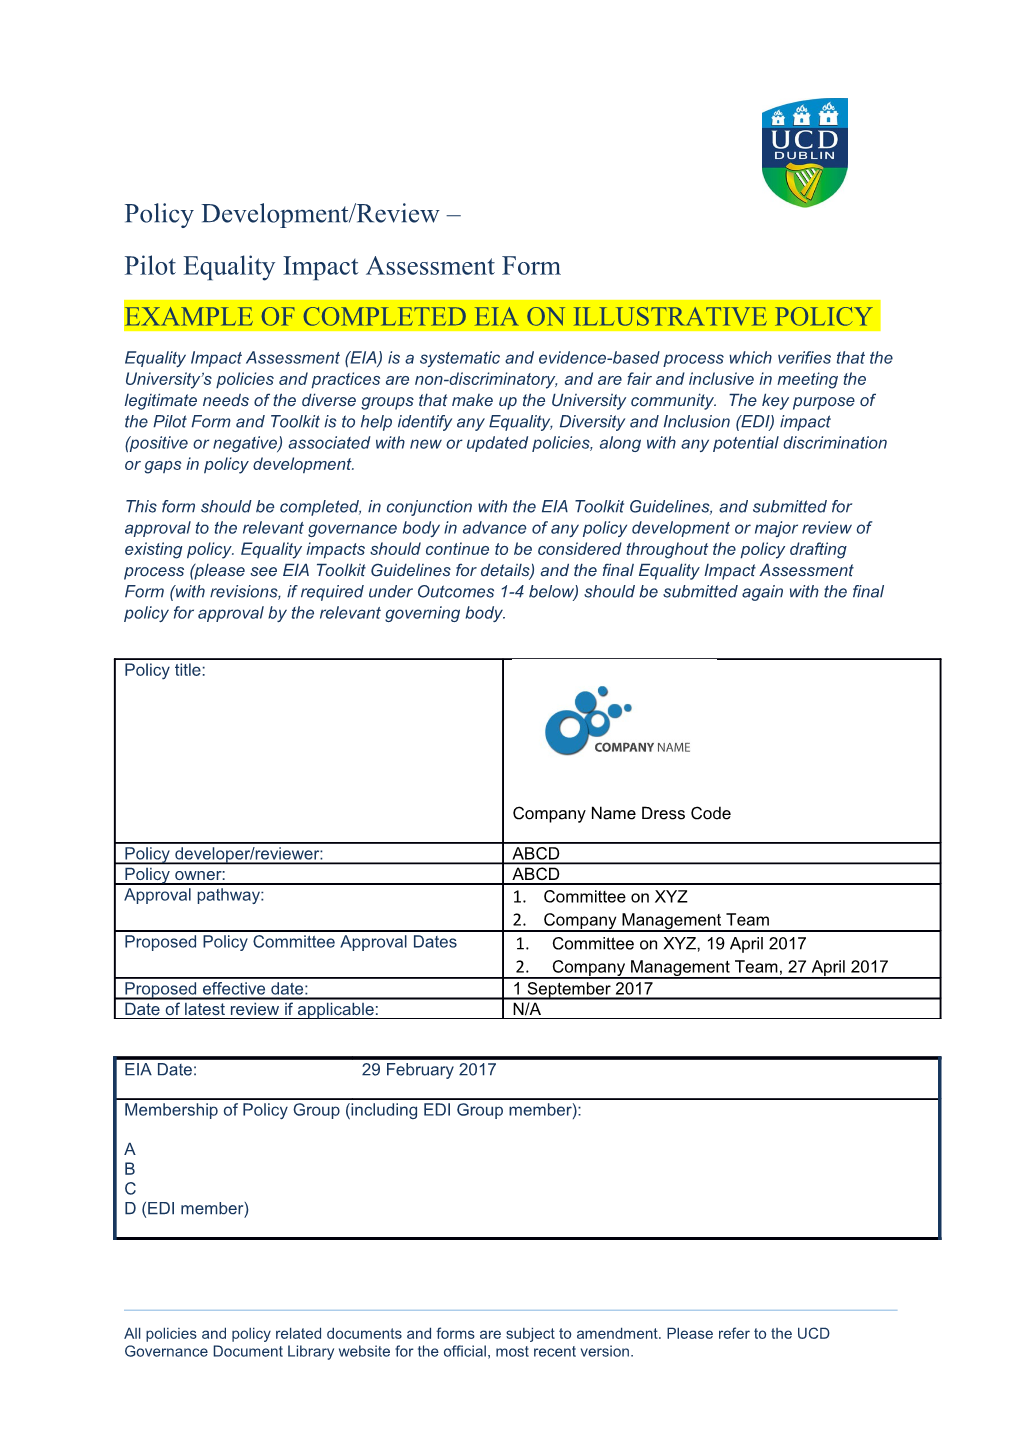 Pilot Equality Impact Assessment Form